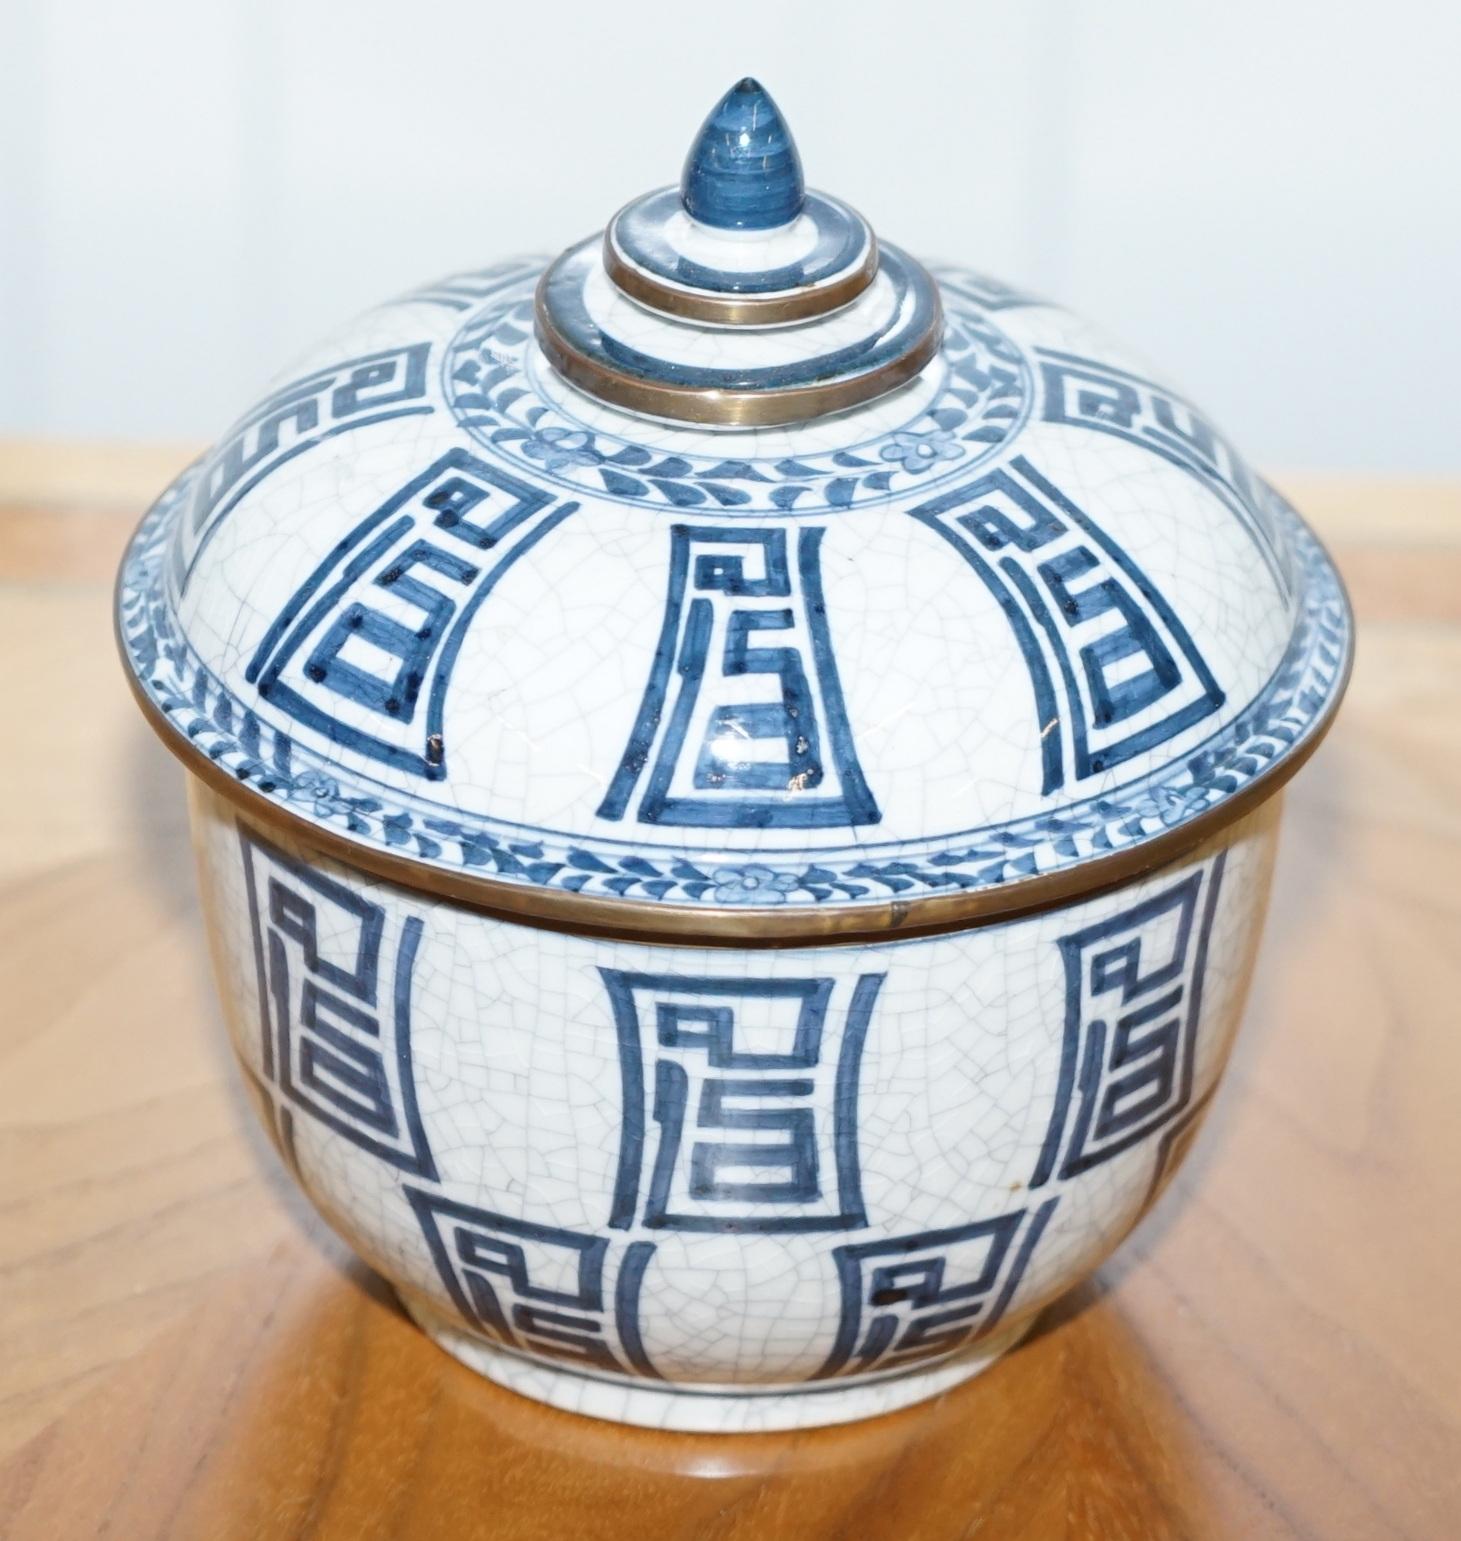 We are delighted to offer for sale this stunning vintage Chinese Porcelain pot with original lid signed to the base

A very good looking and decorative little pot, its free from damage and looks very decorative

Dimensions:

Height